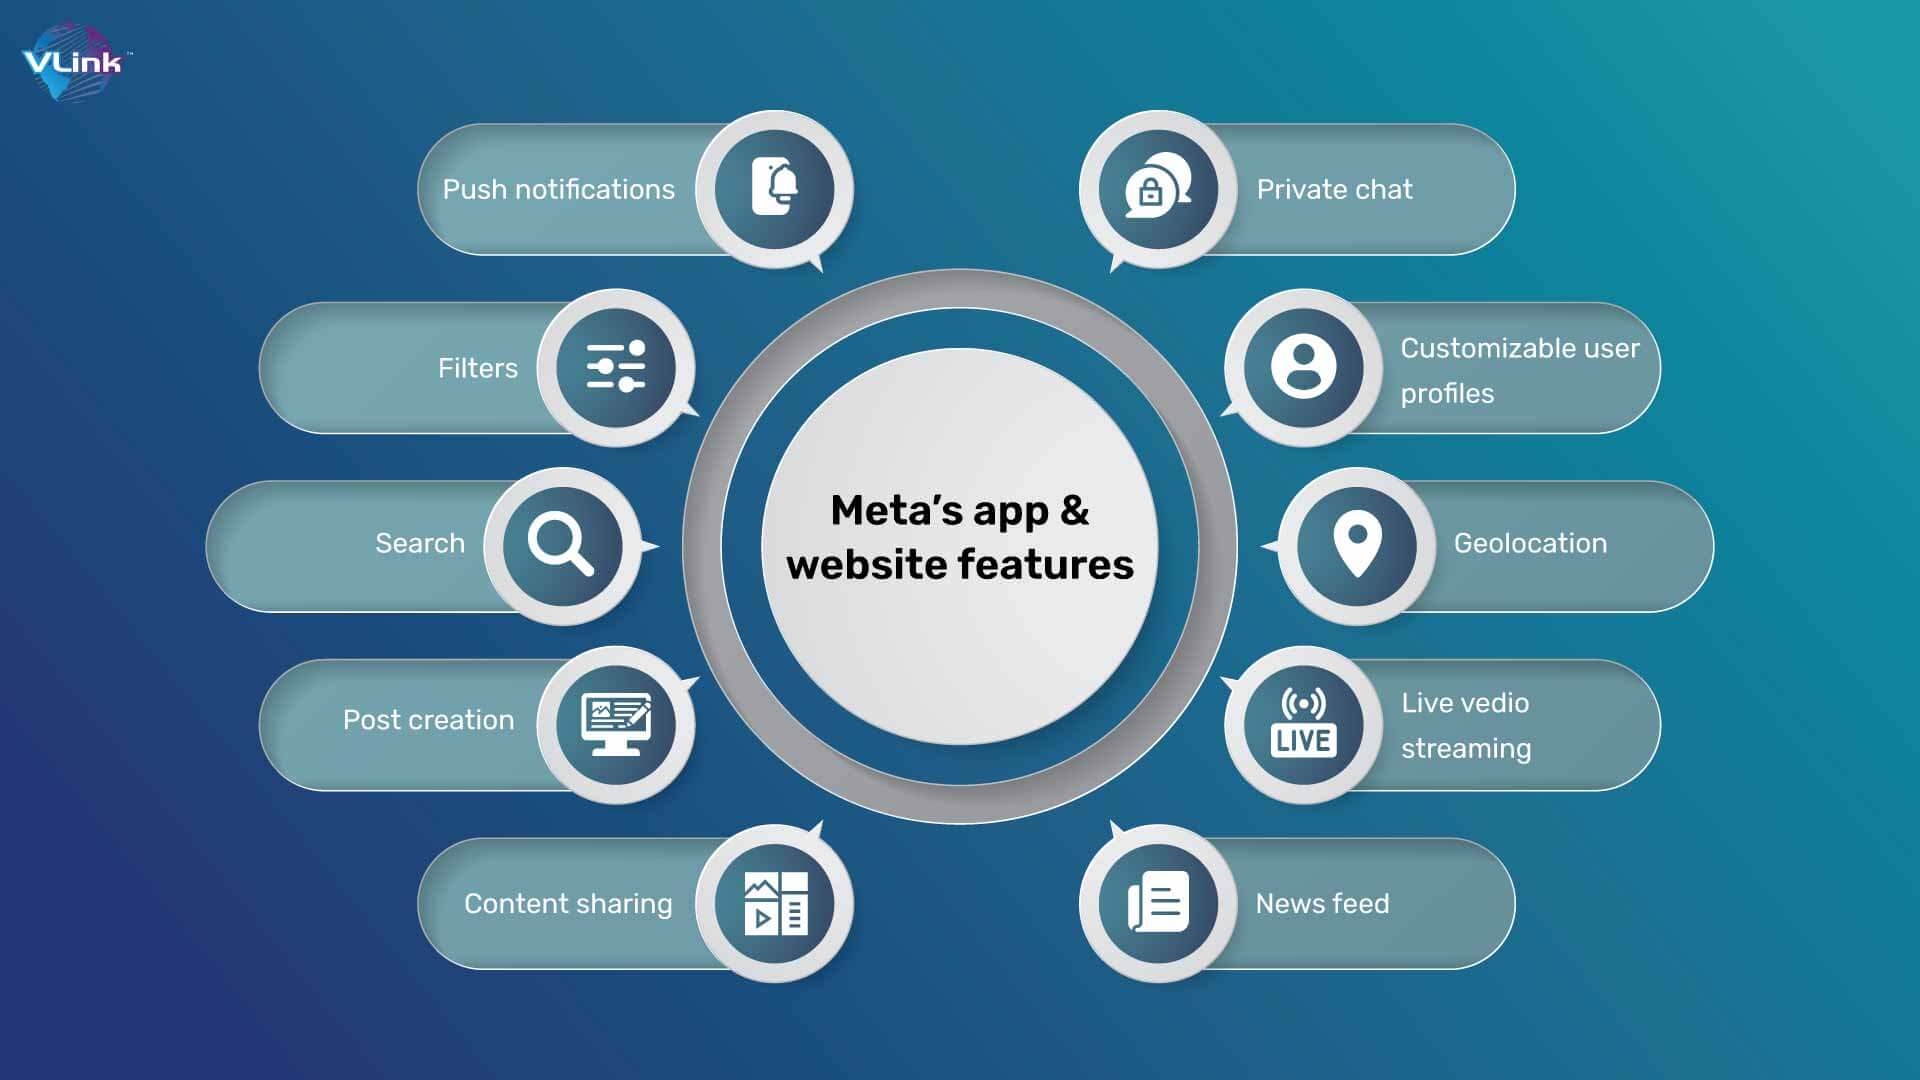 Meta’s app & website features  (Use icons for every feature) 